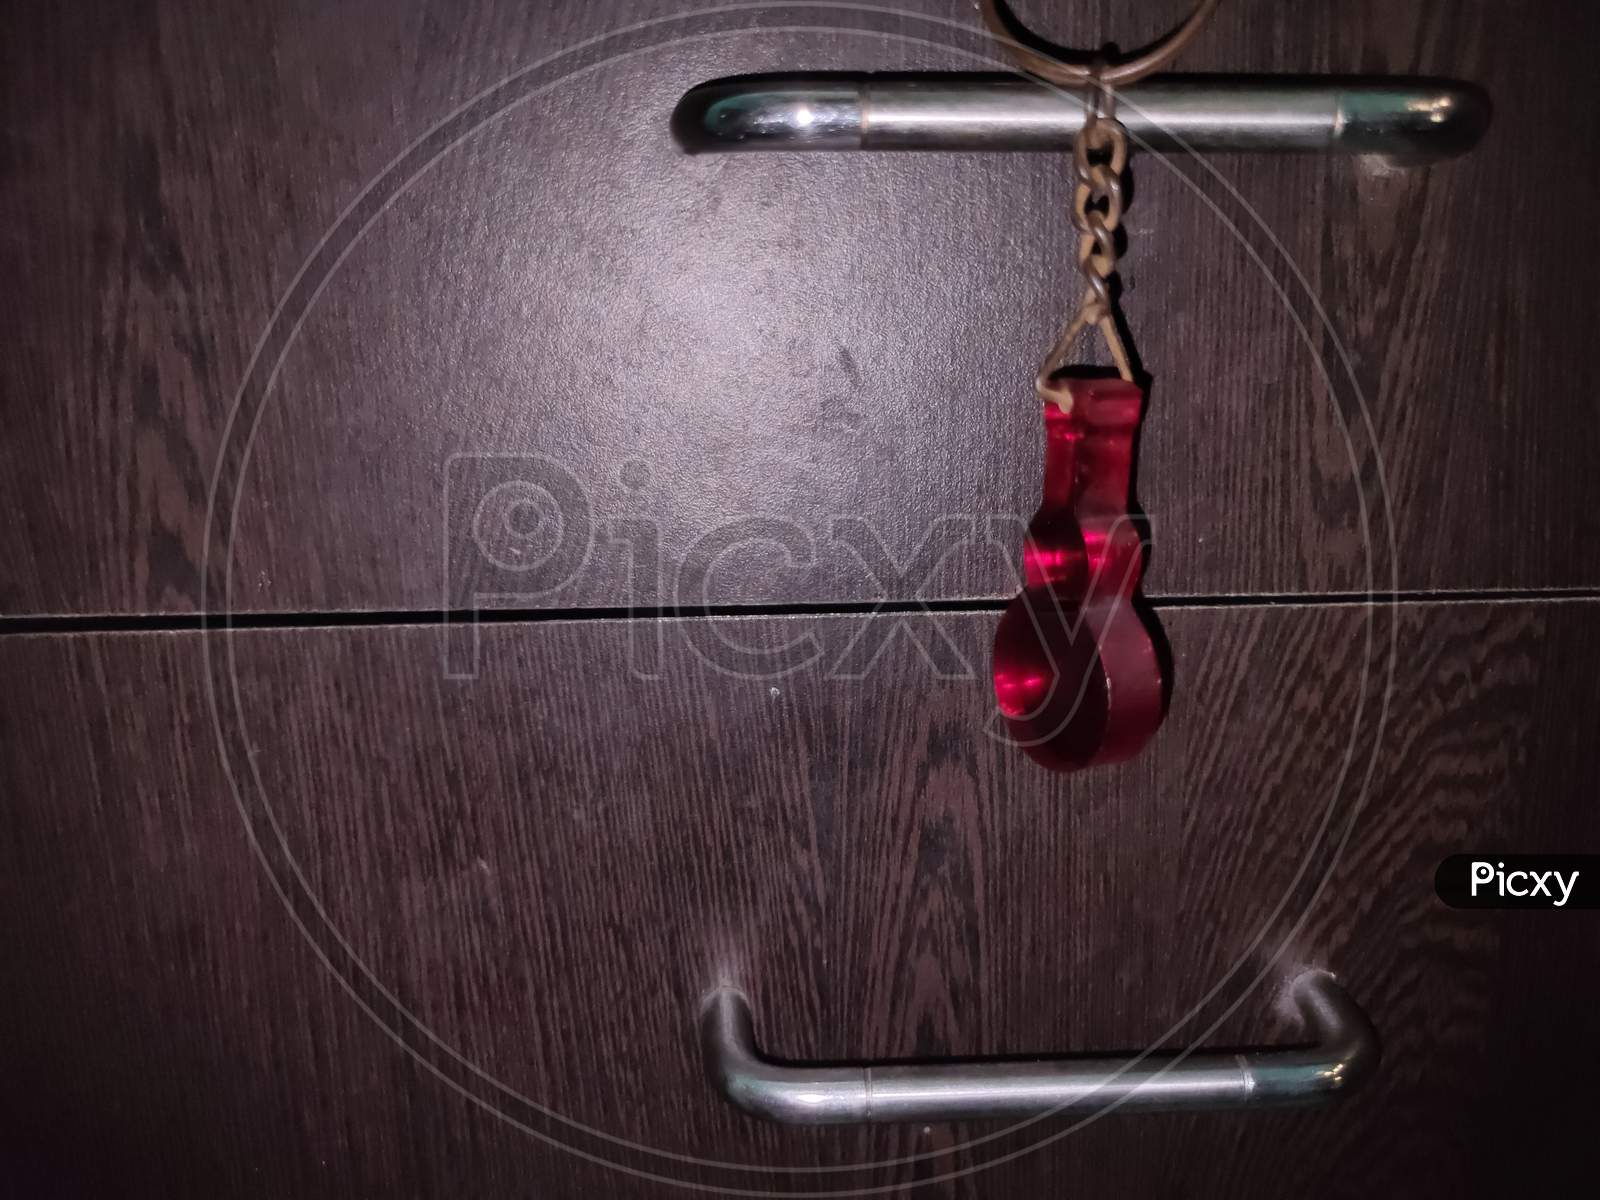 A Hanging Red Guitar Key-Chain In Low Light Condition